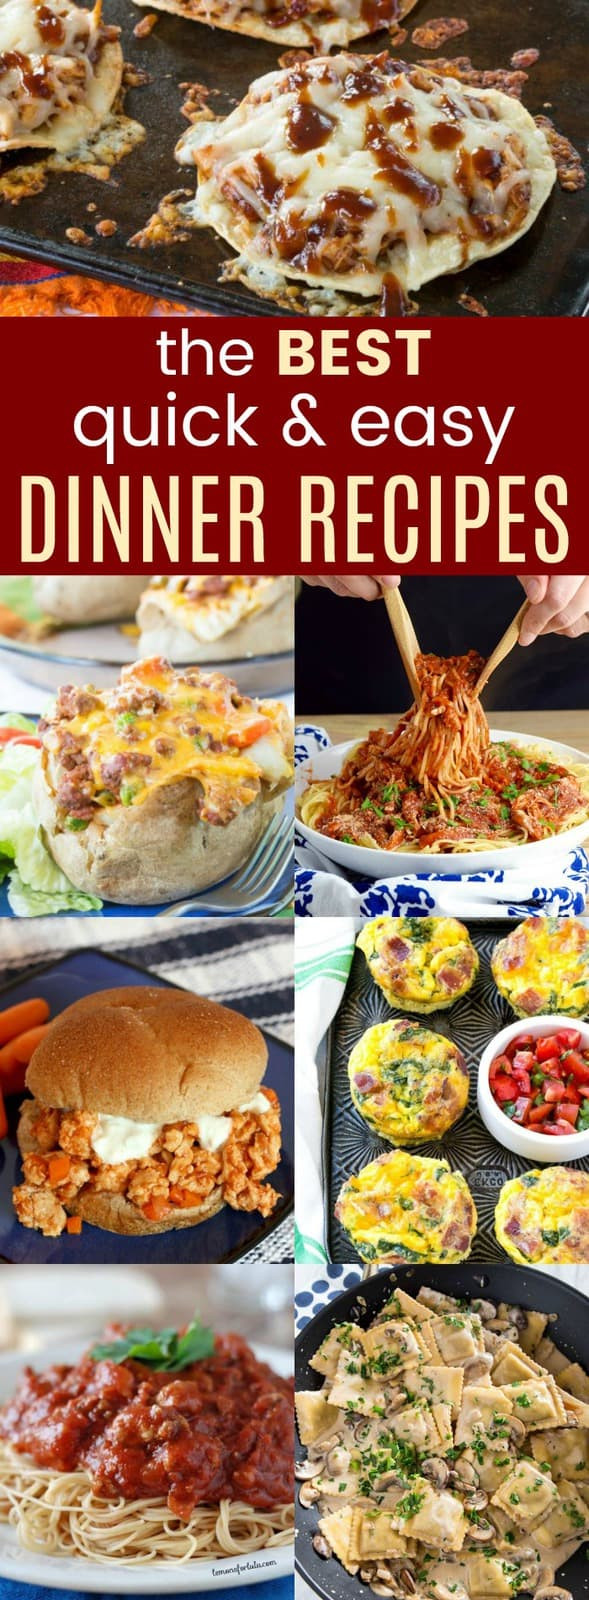 Best Quick Dinners
 42 of the Best Quick and Easy Dinner Ideas Cupcakes